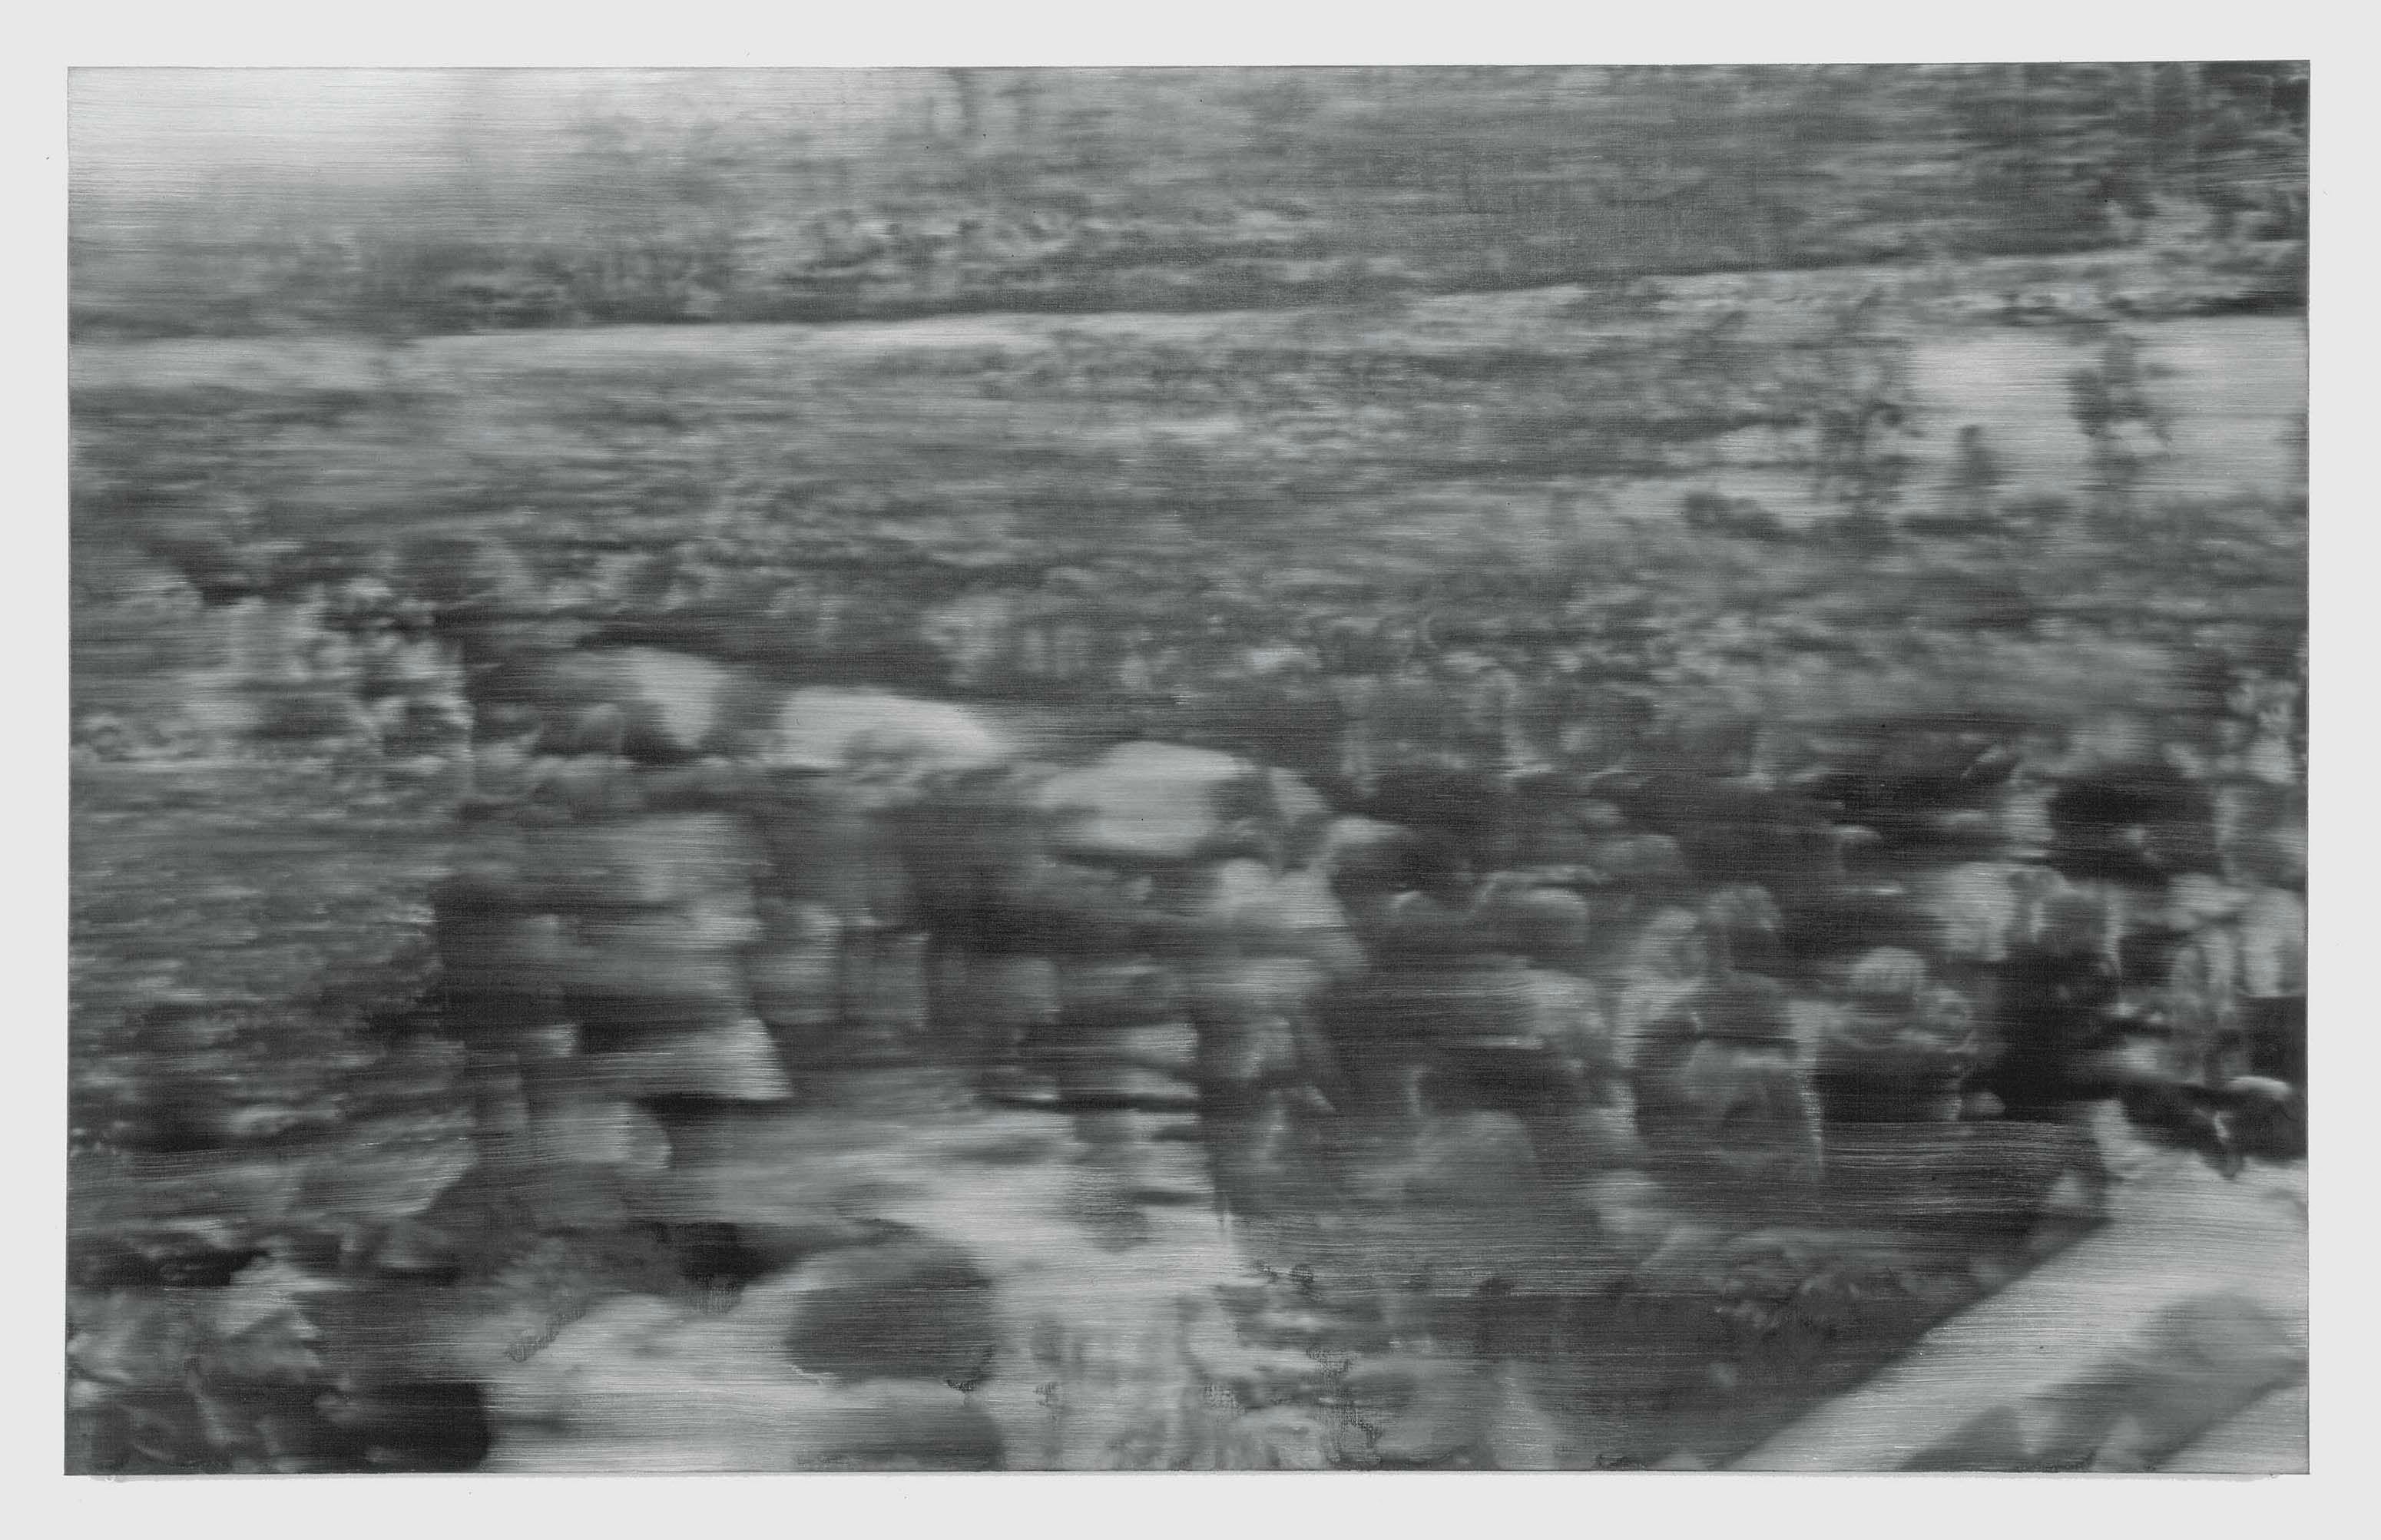 A painting by Gerhard Richter, titled Beerdigung (Funeral), dated 1988.